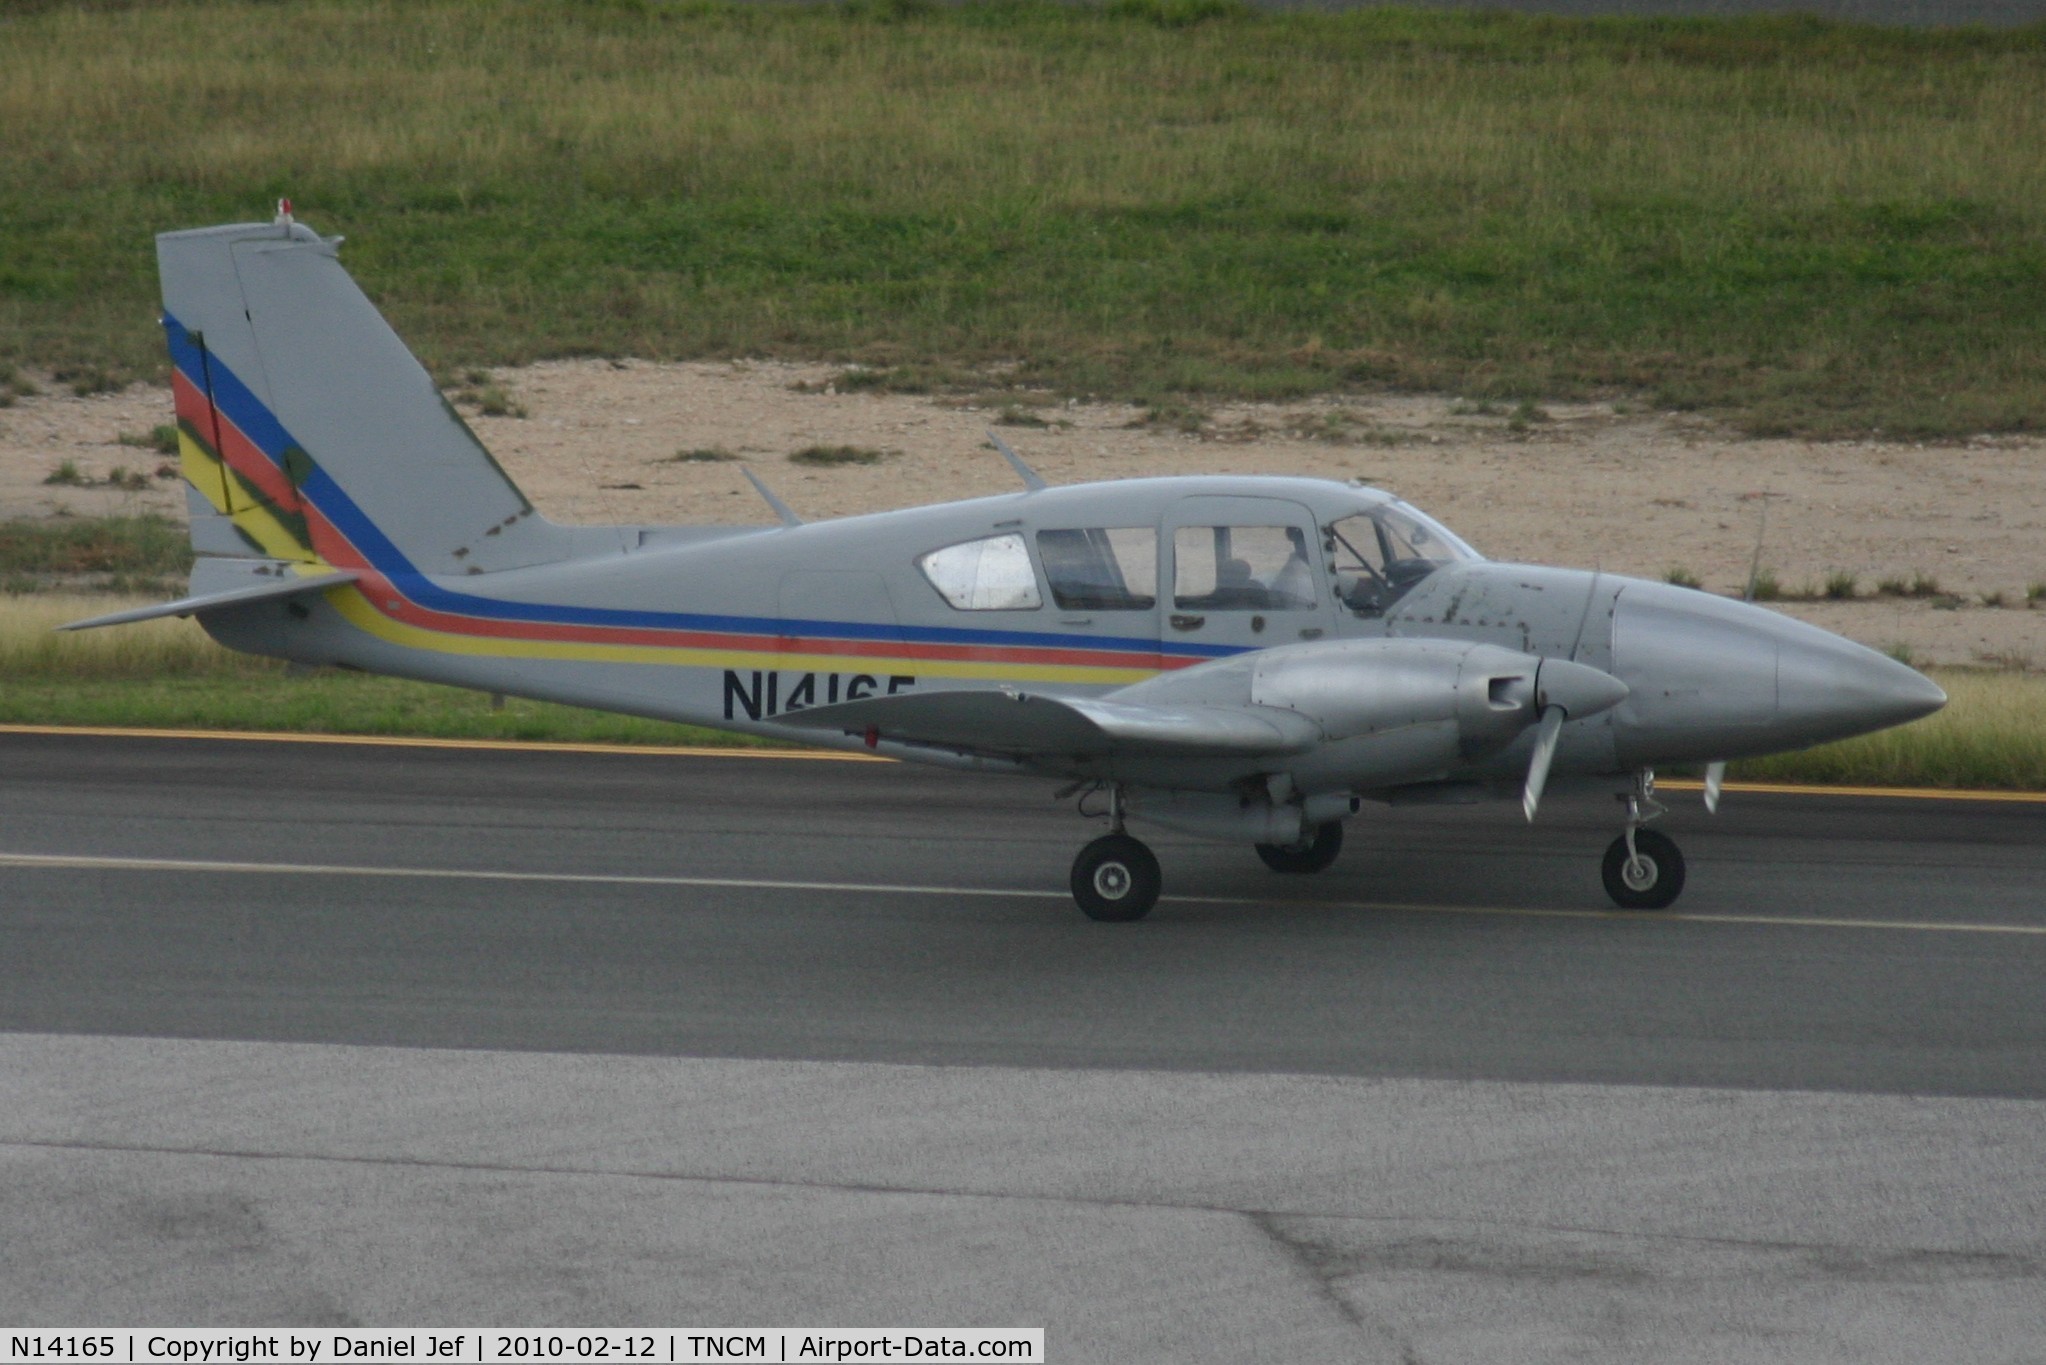 N14165, 1971 Piper PA-23-250 Aztec C/N 27-4729, N14165 taxing to parking at TNCM